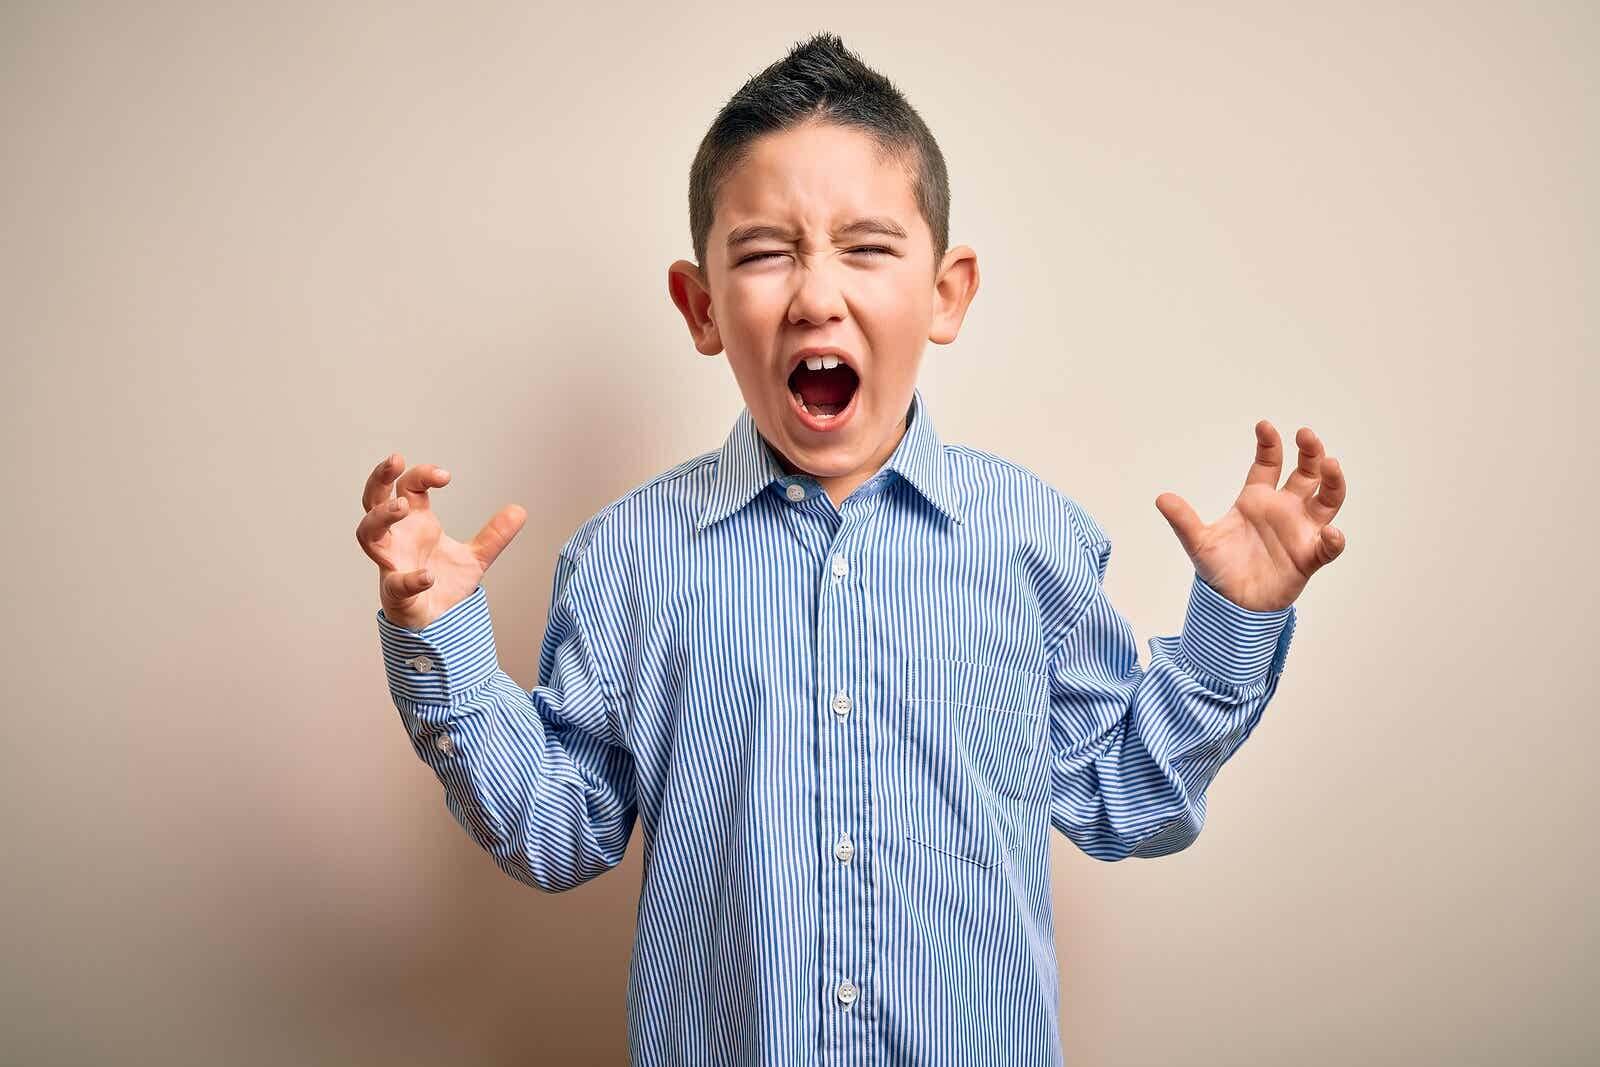 Child screaming in anger because he doesn’t know how to get rid of his anger.